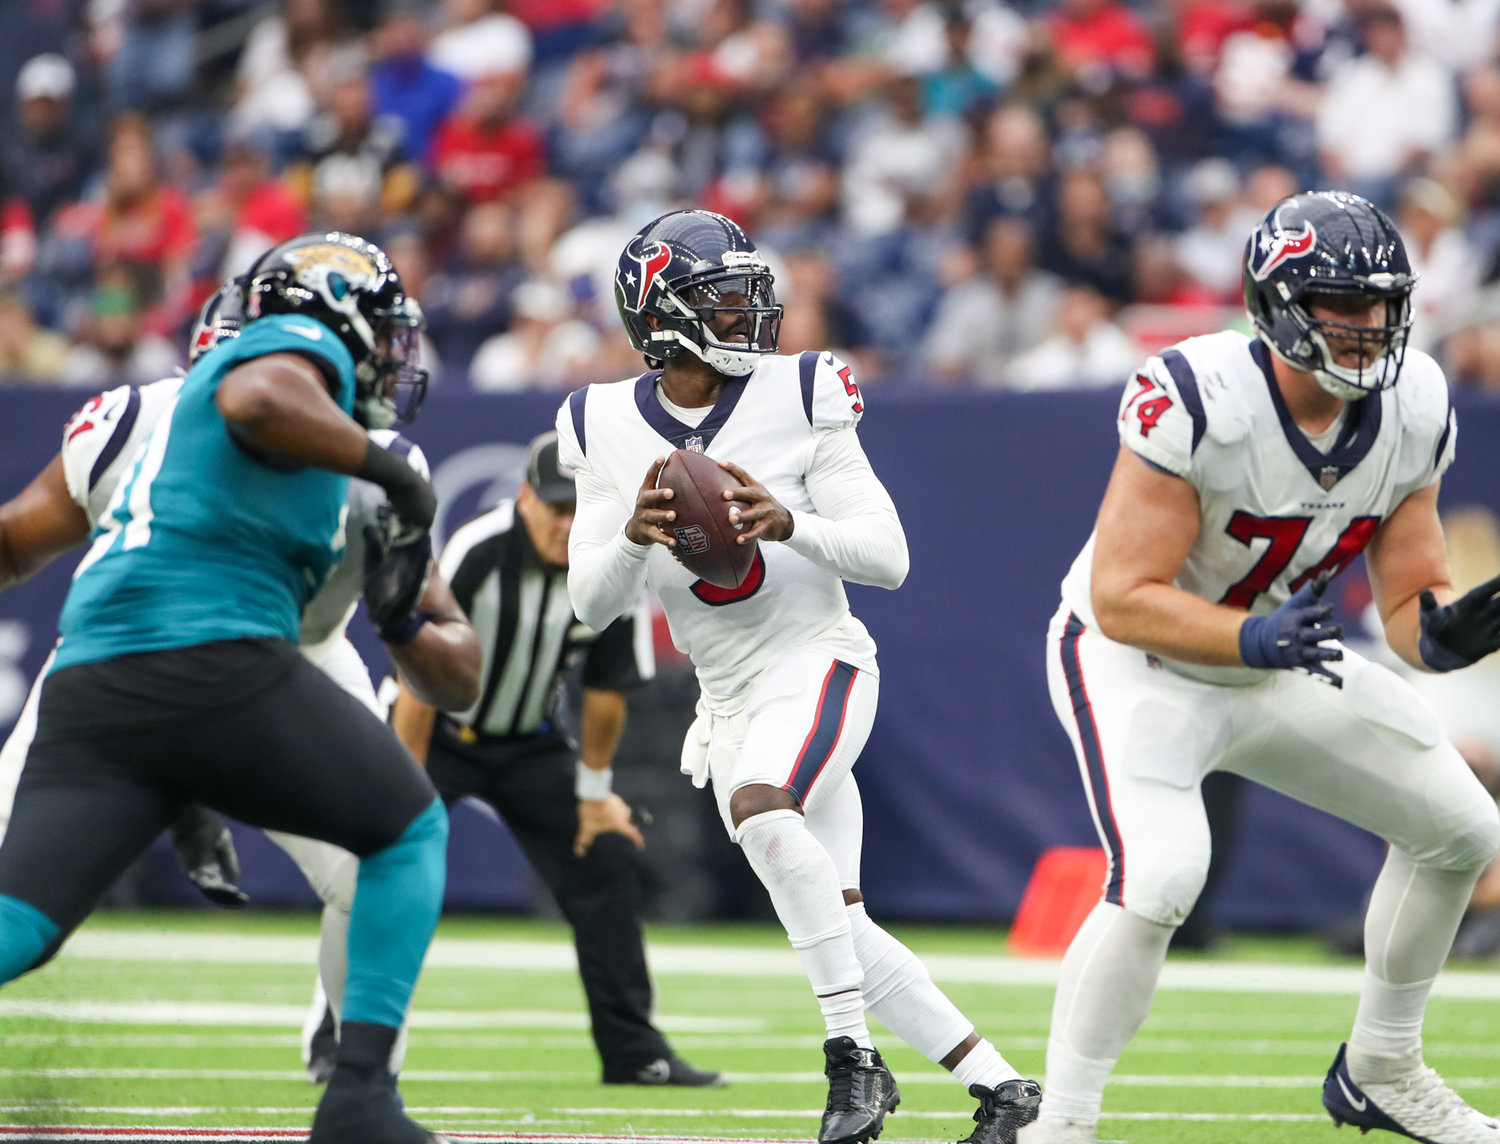 Houston Texans quarterback Tyrod Taylor (5) drops back to pass during the first half of an NFL game between the Houston Texans and the Jacksonville Jaguars on September 12, 2021 in Houston, Texas.